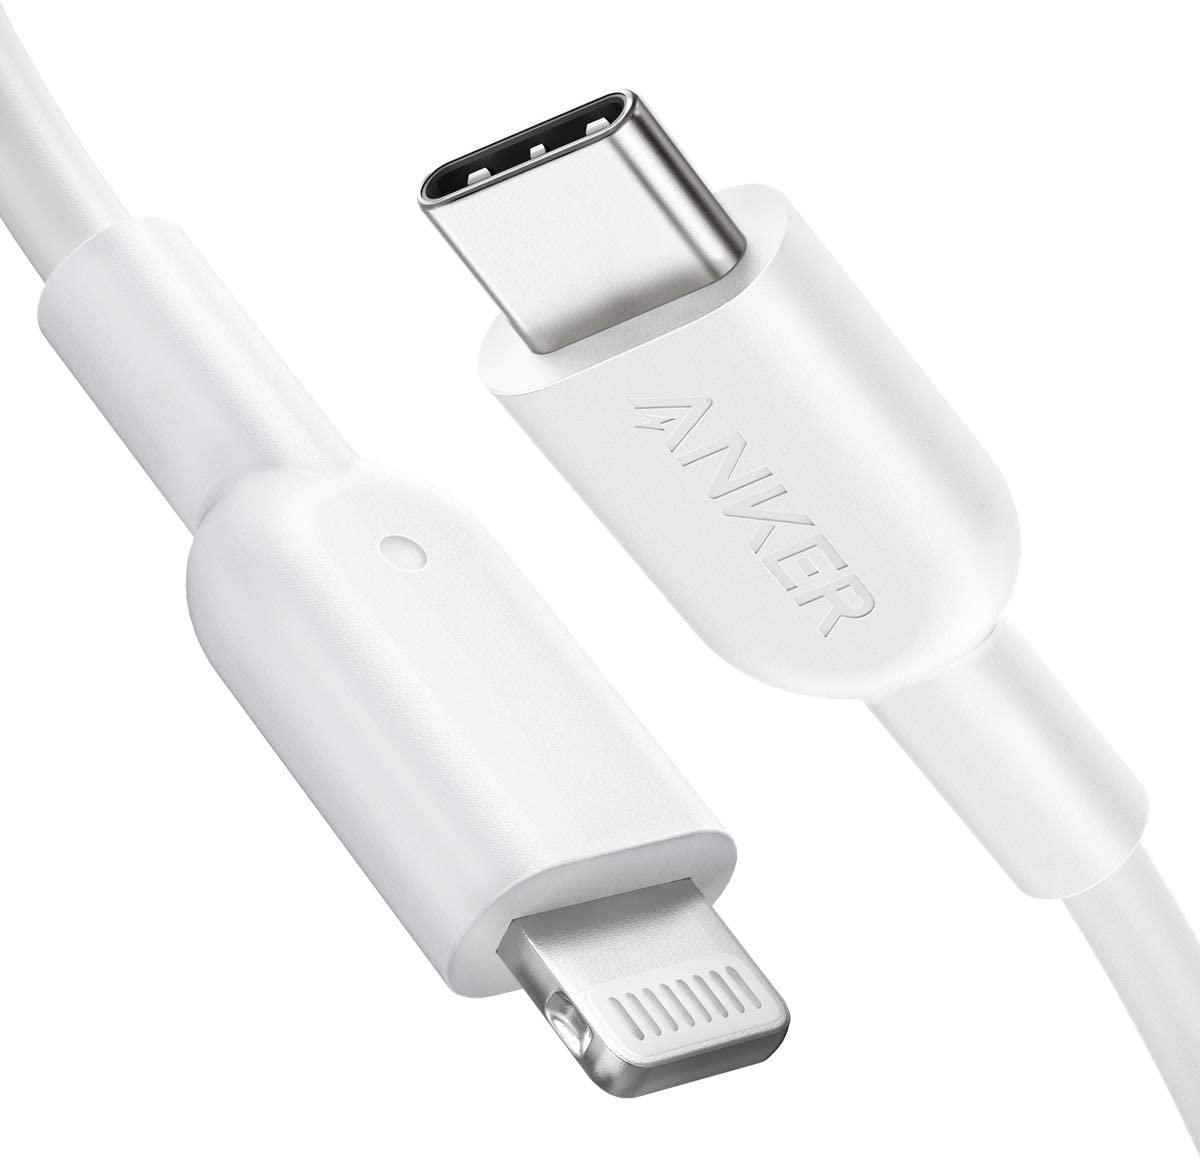 Anker Apple iPhone 12 USB-C to Lightning MFI Charging Cable for $9.99